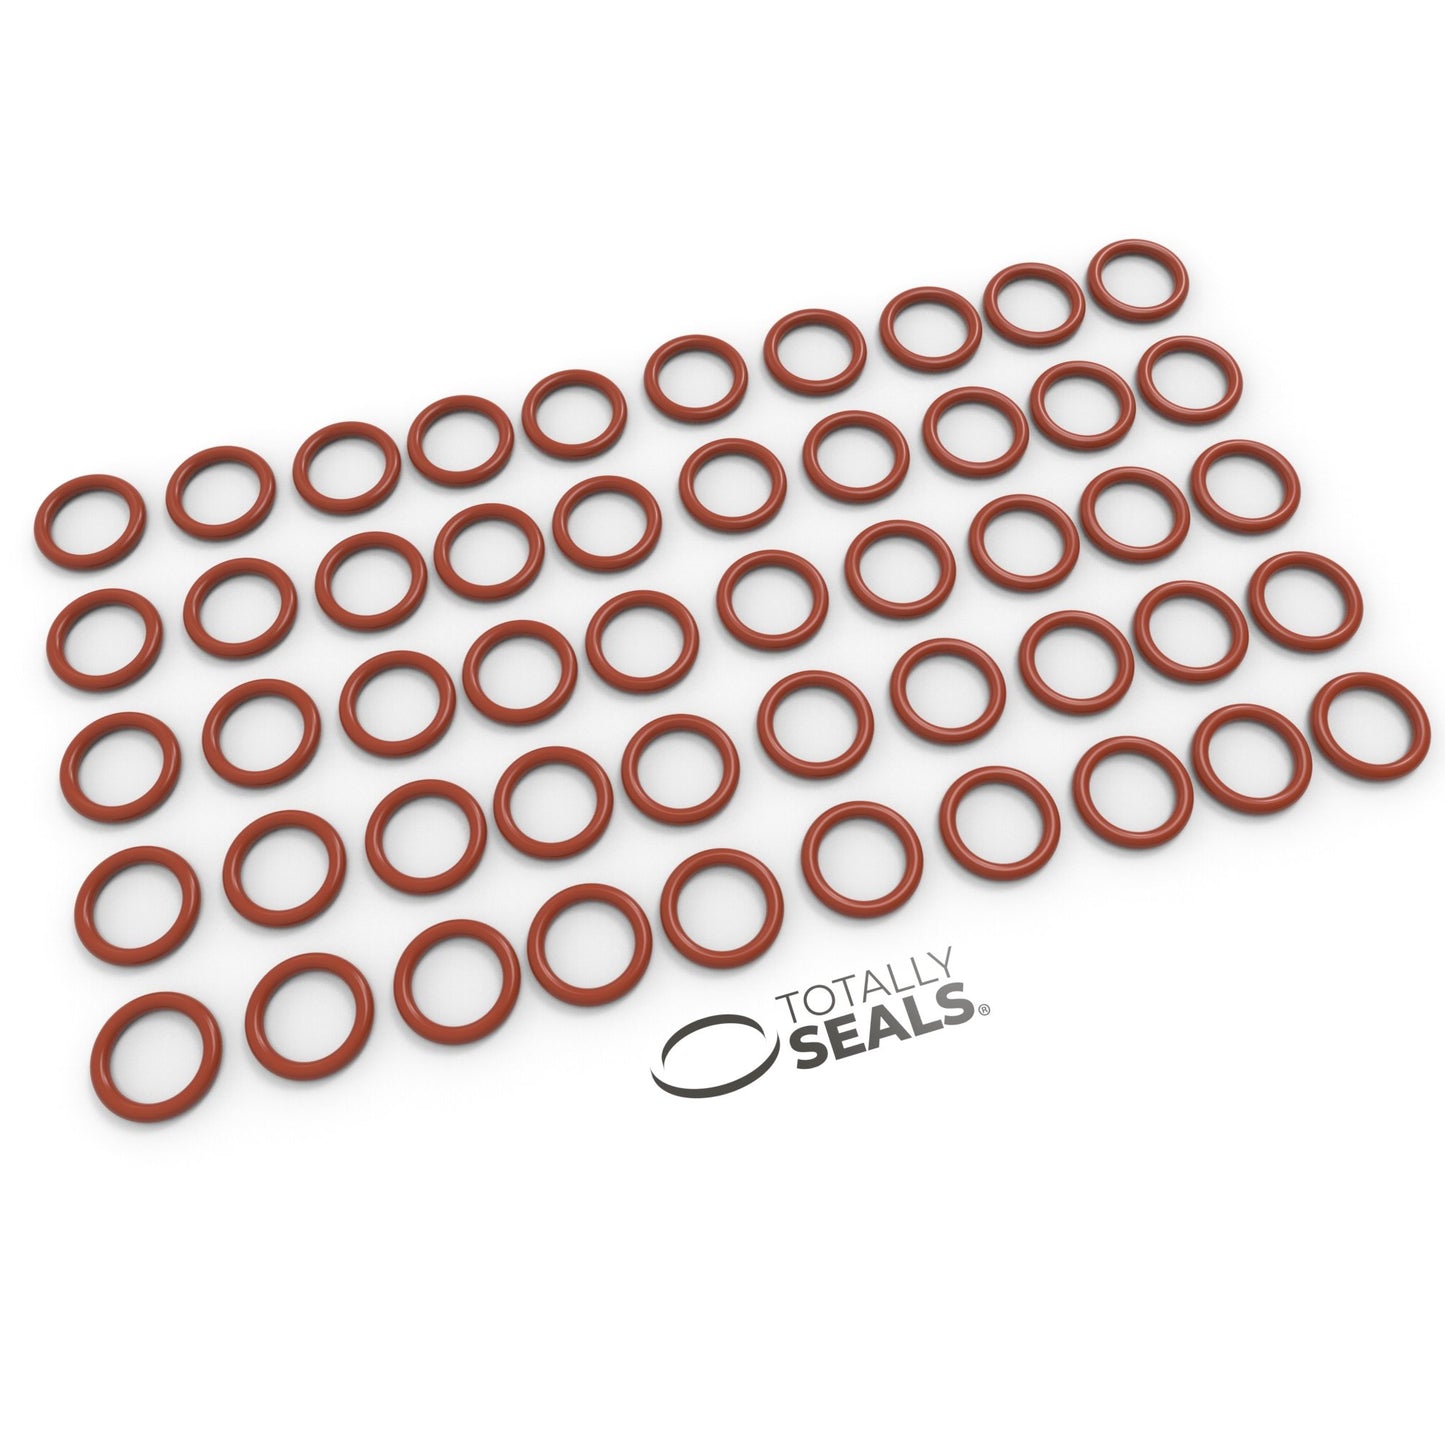 13mm x 3mm (19mm OD) Silicone O-Rings - Totally Seals®